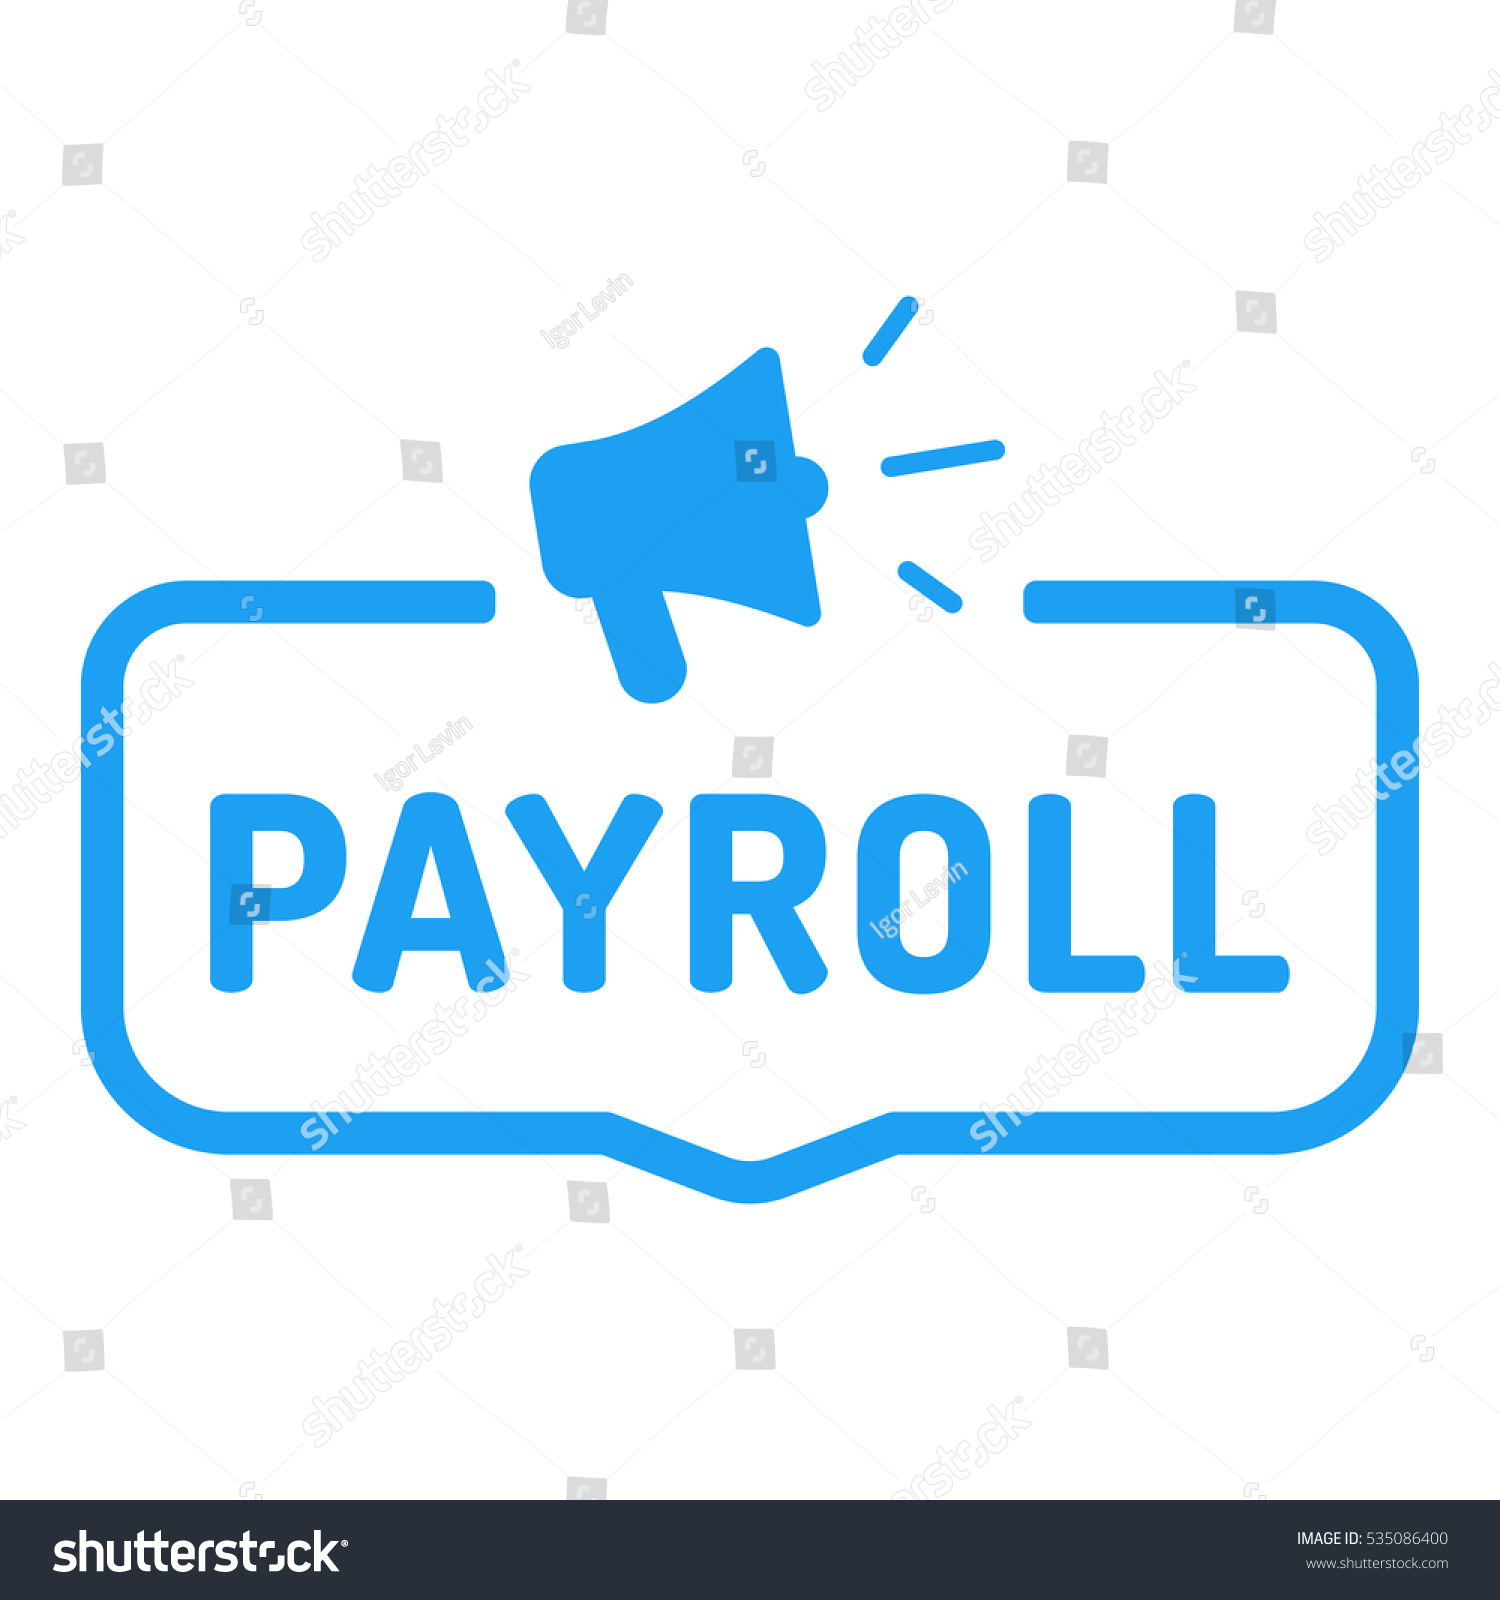 Payroll - Trion Solutions, Inc.Trion Solutions, Inc.